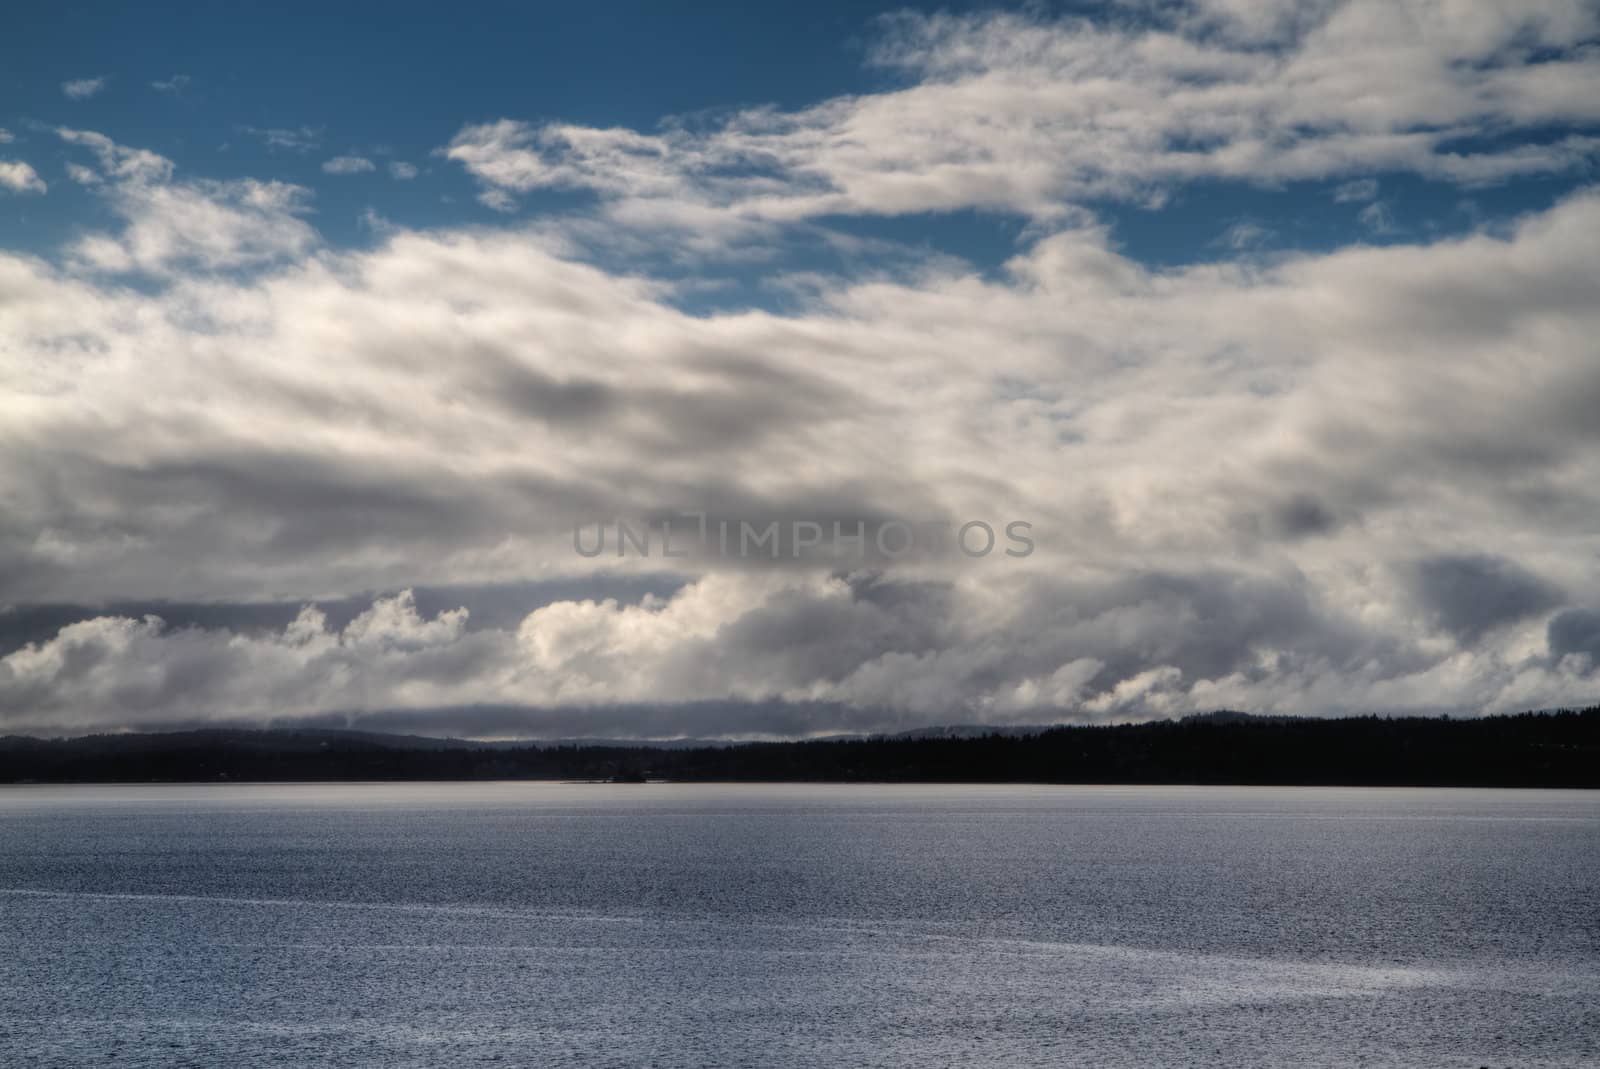 View of Juan de Fuca straights from Port Townsend with cloudscape